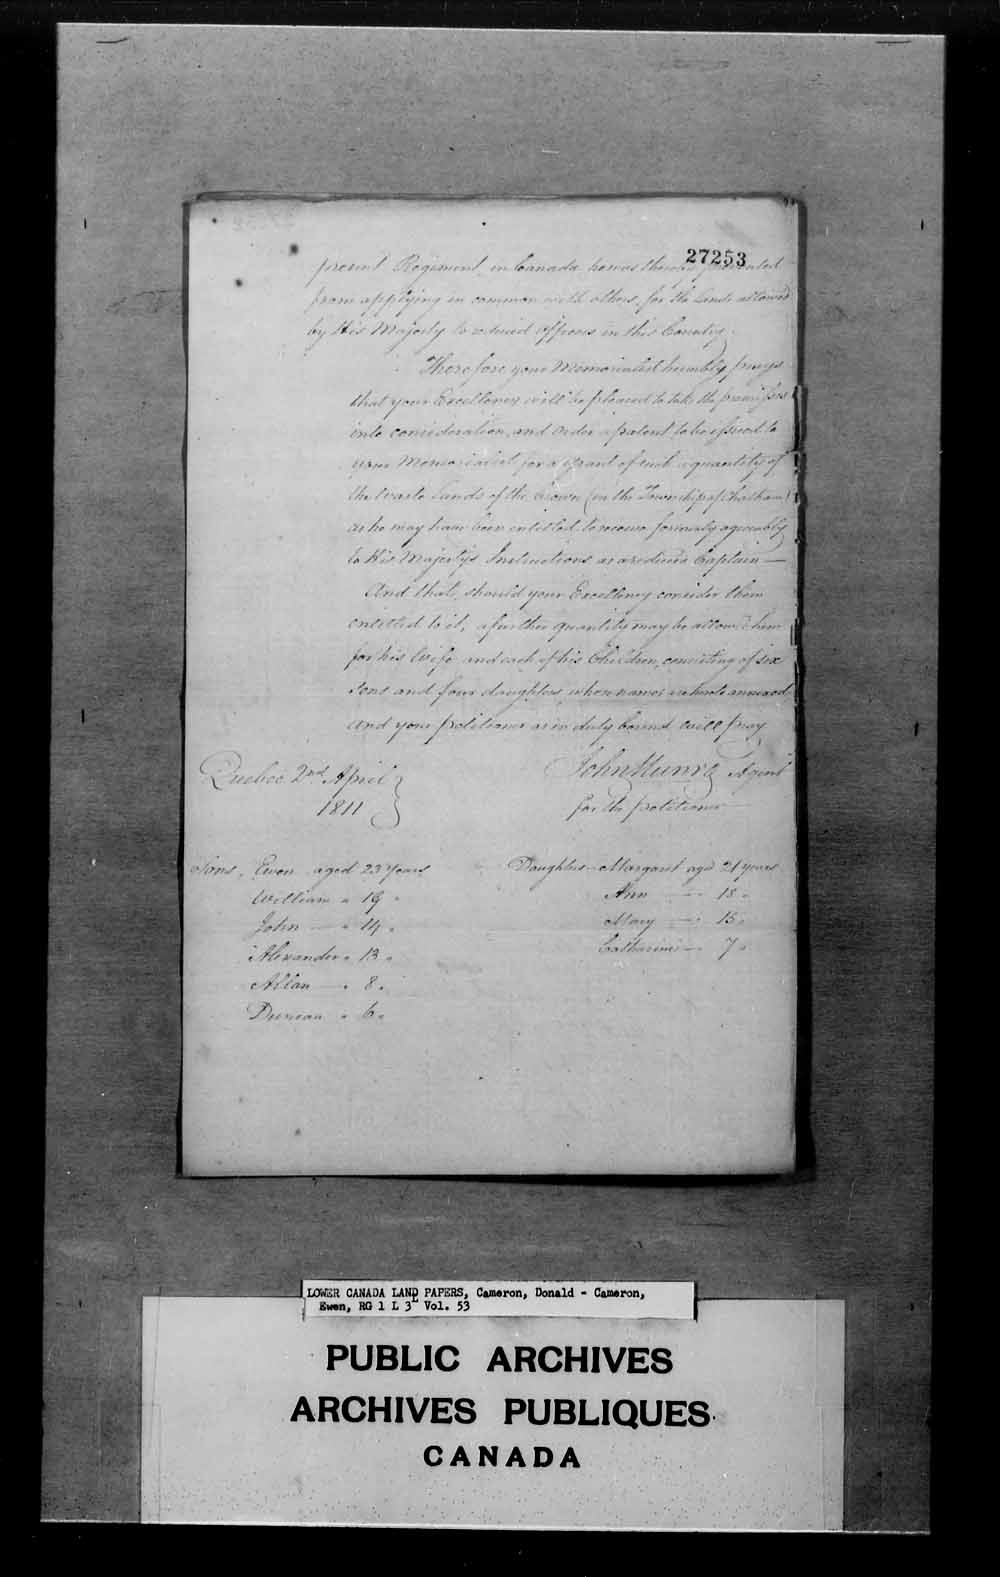 Digitized page of  for Image No.: e006611633